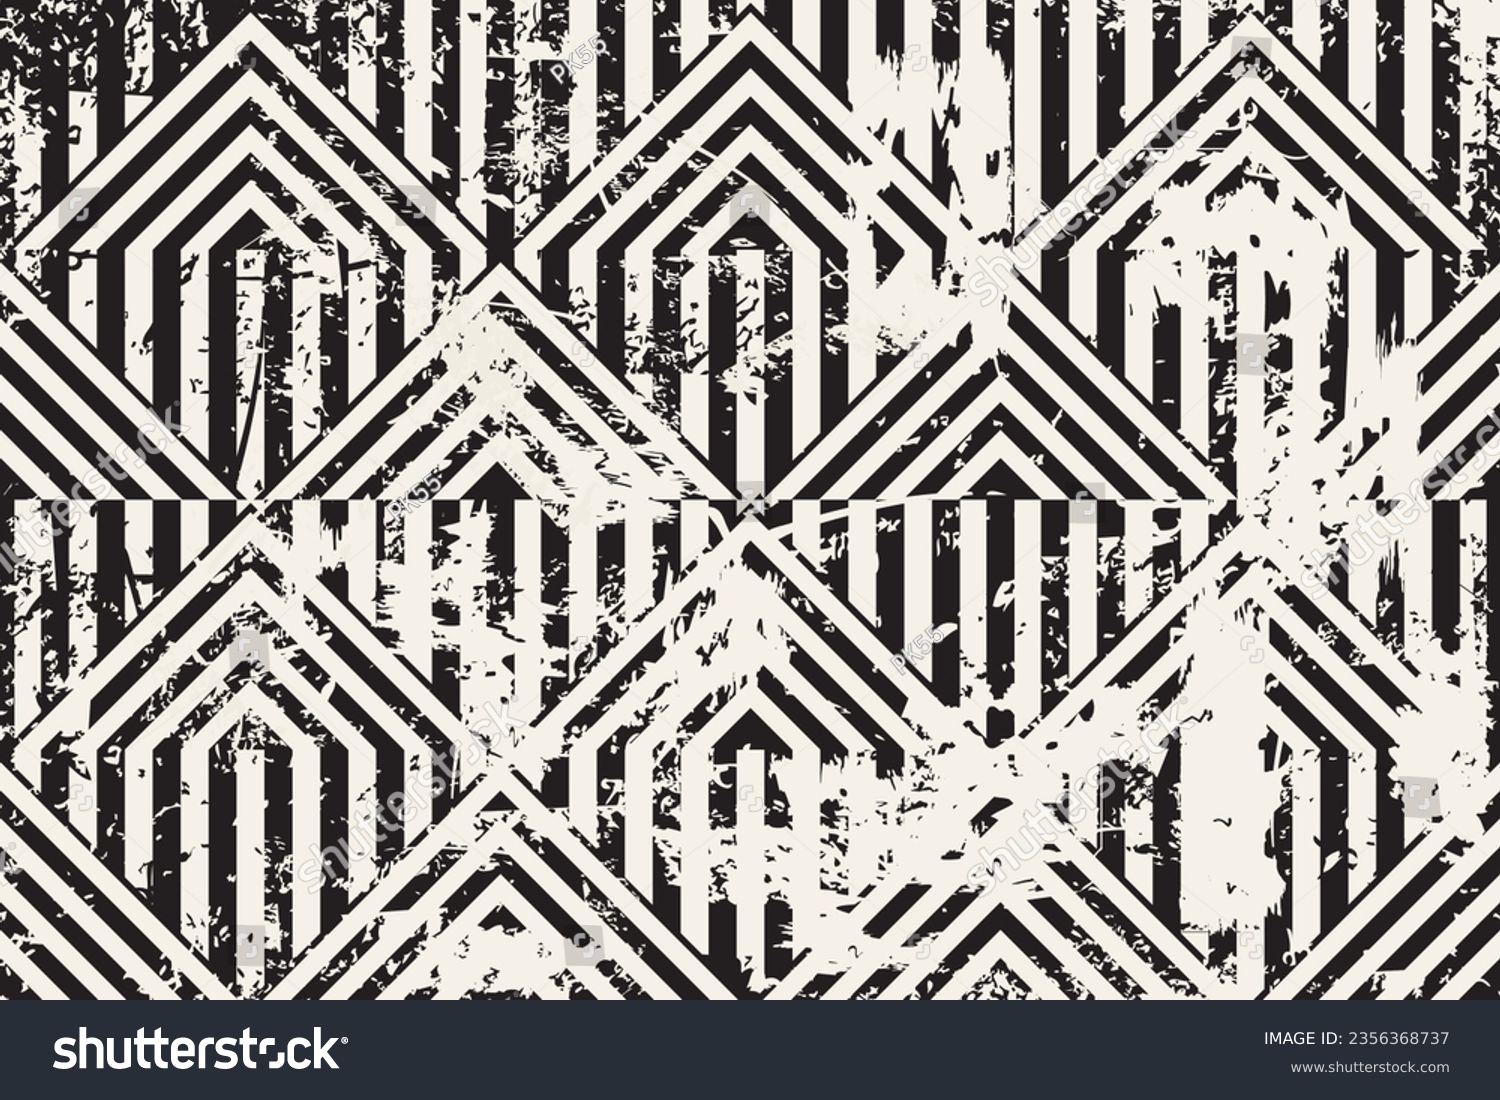 Abstract geometric seamless pattern with an effect of attrition. Vector shabby geometric carpet. Vintage background for ceramic tile, wallpaper, linoleum, textile, rug, web page #2356368737